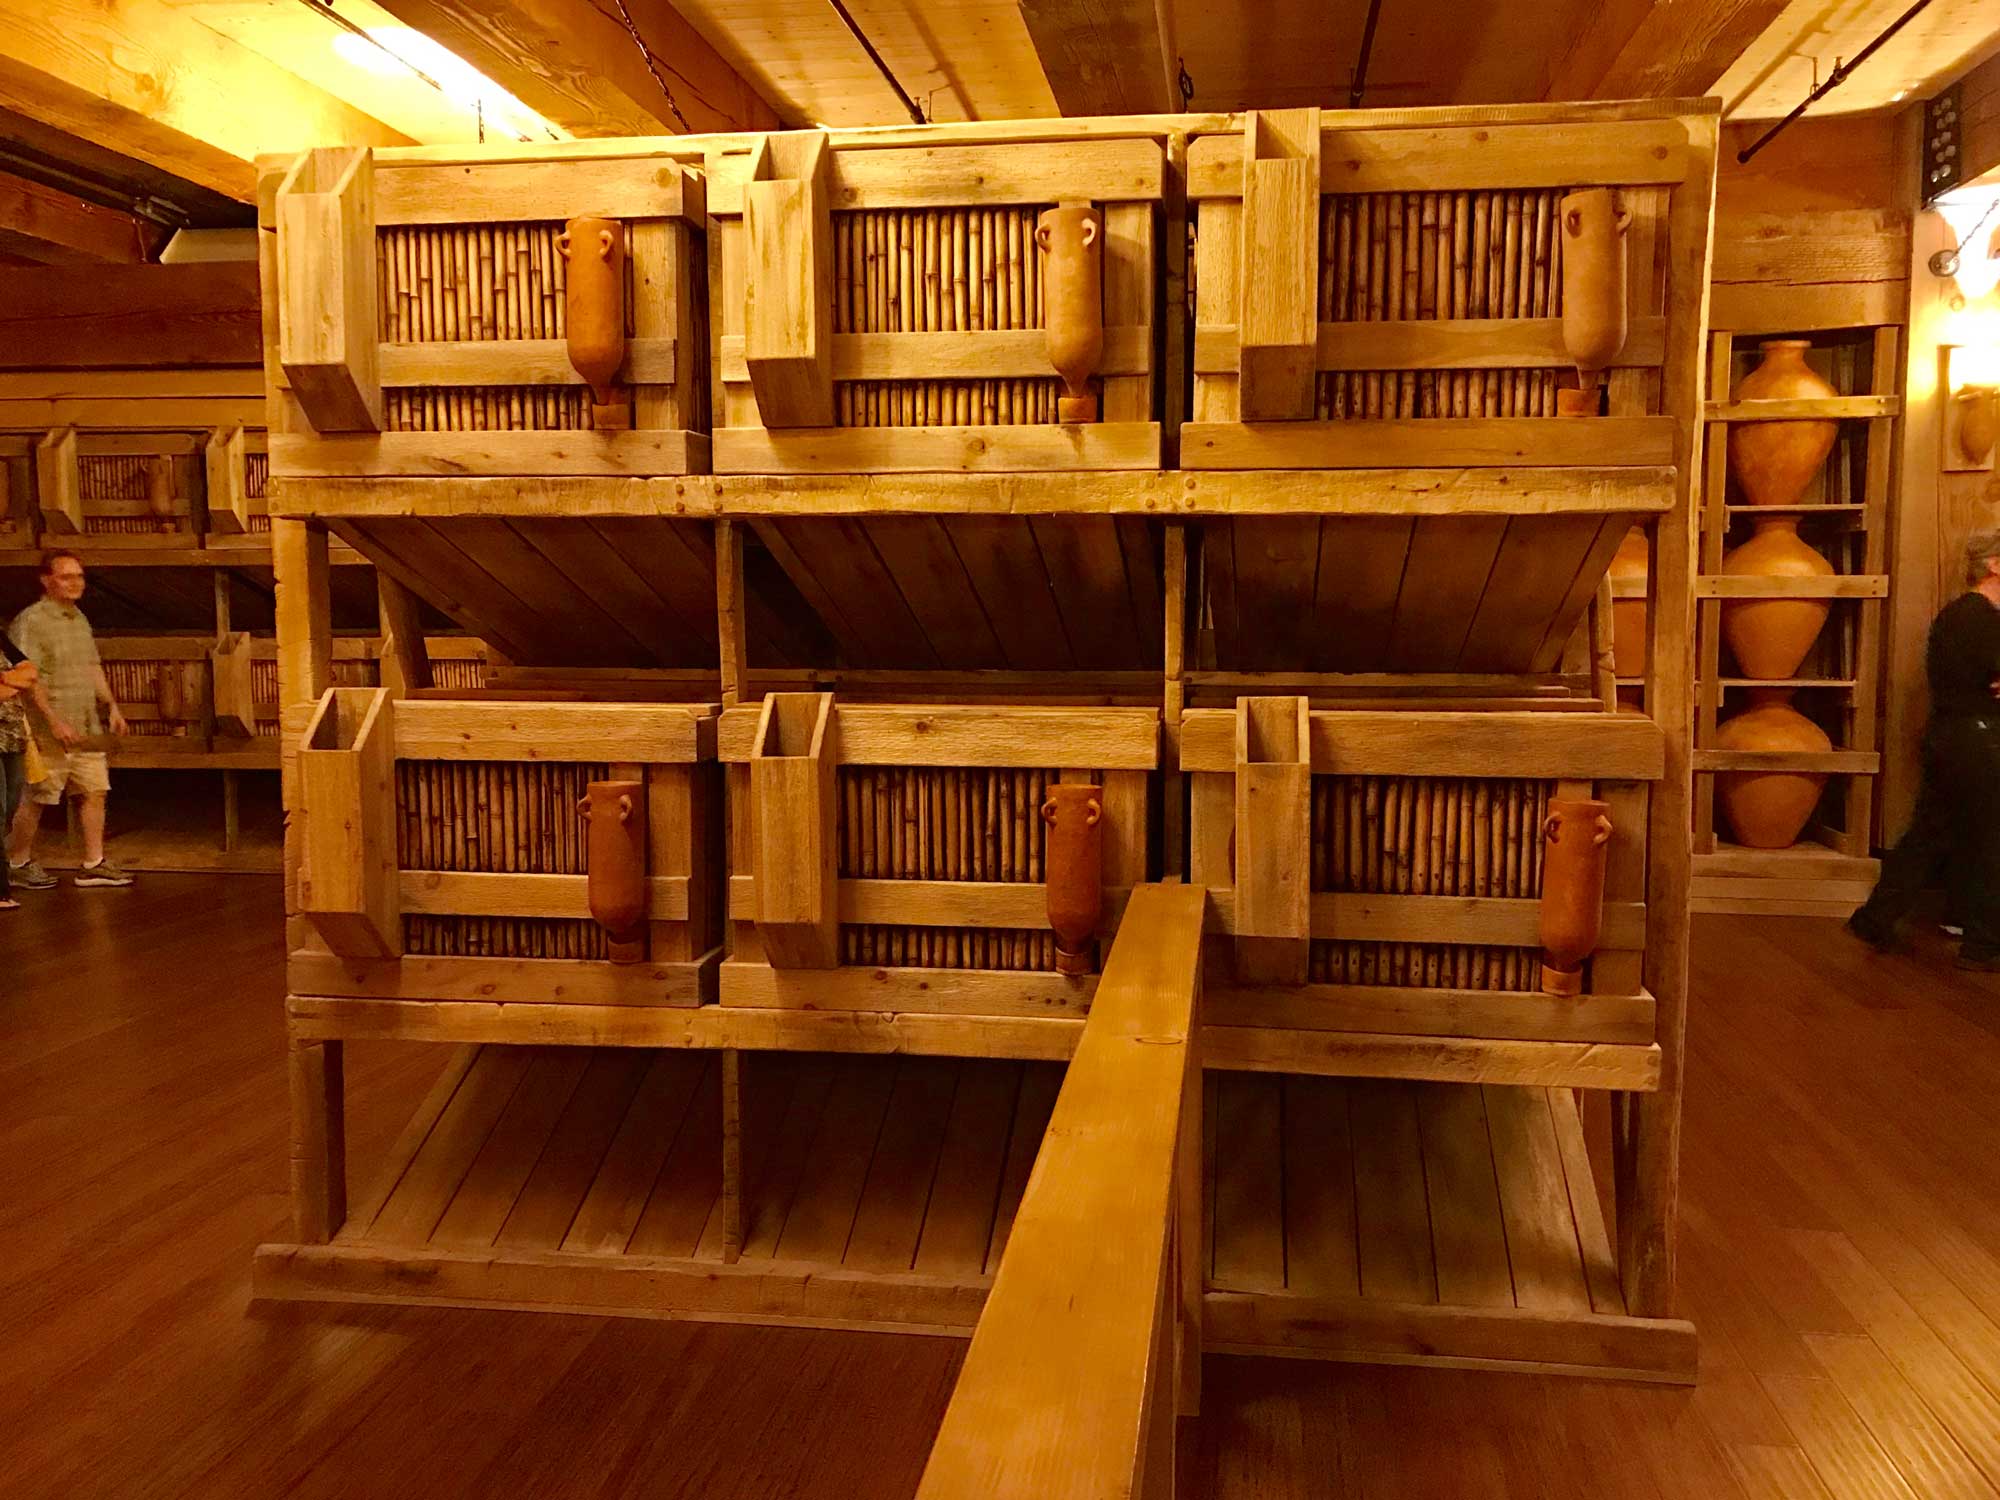 wooden boxes stacked in the row on top of each other